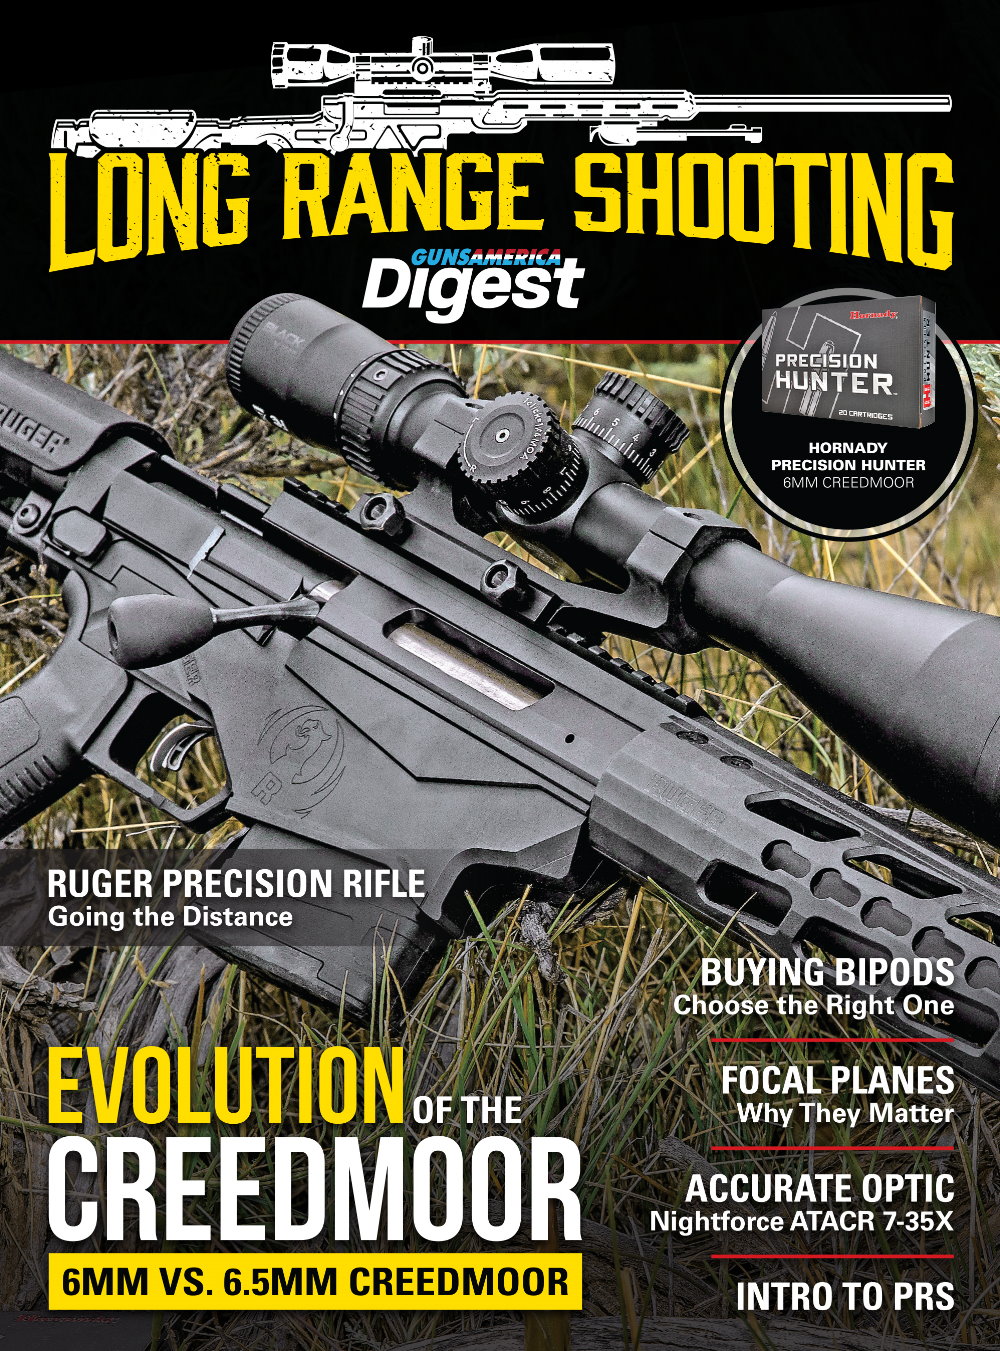 Long Range Shooting - New GunsAmerica Specialty Publication - Fall 2017 Cover & Article Links